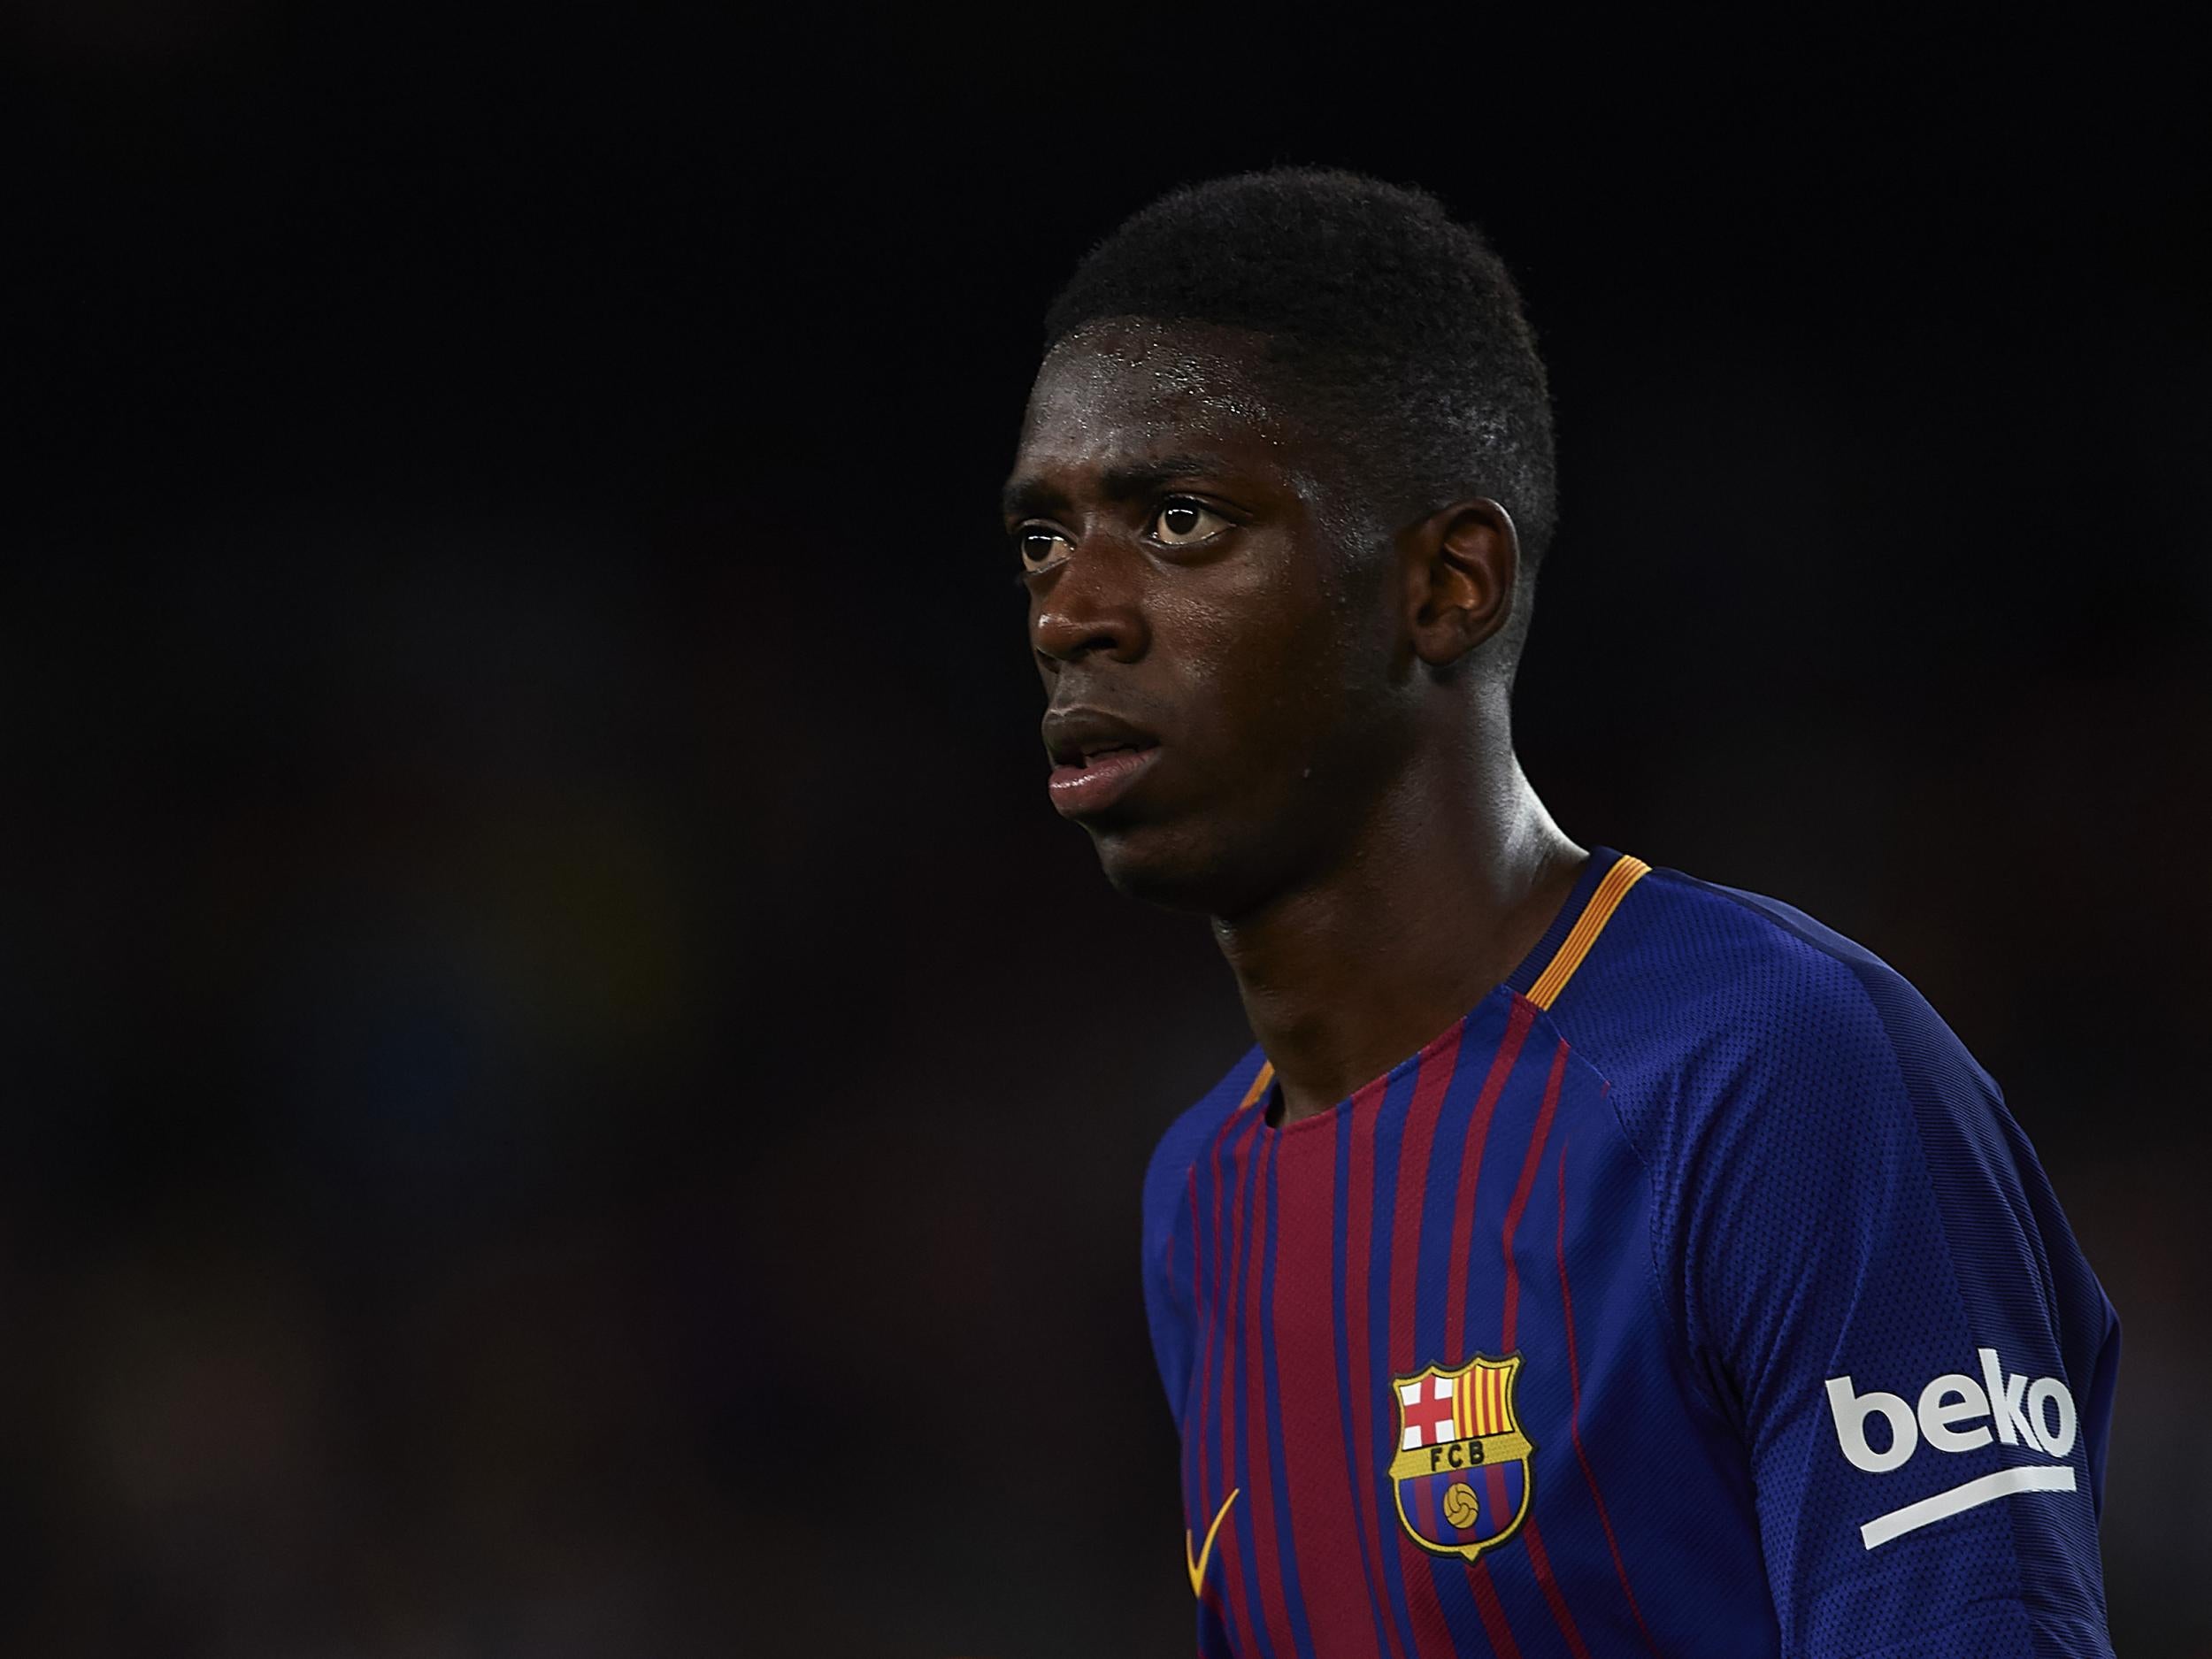 The 20-year-old joined Barcelona from Dortmund this summer for a fee rising to €150m